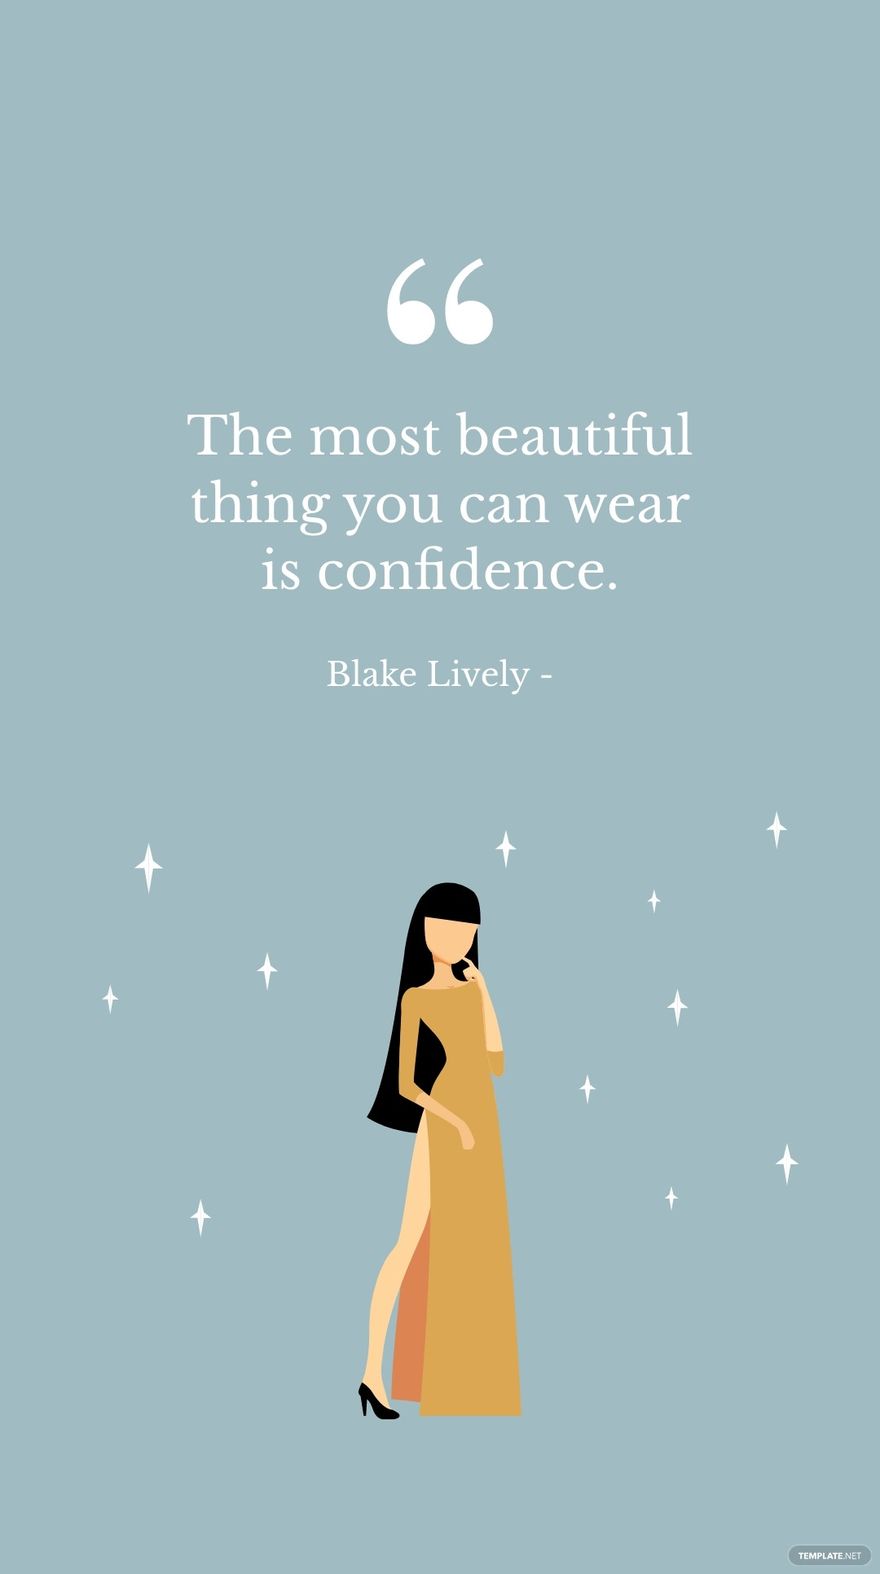 Blake Lively - The most beautiful thing you can wear is confidence. in JPG